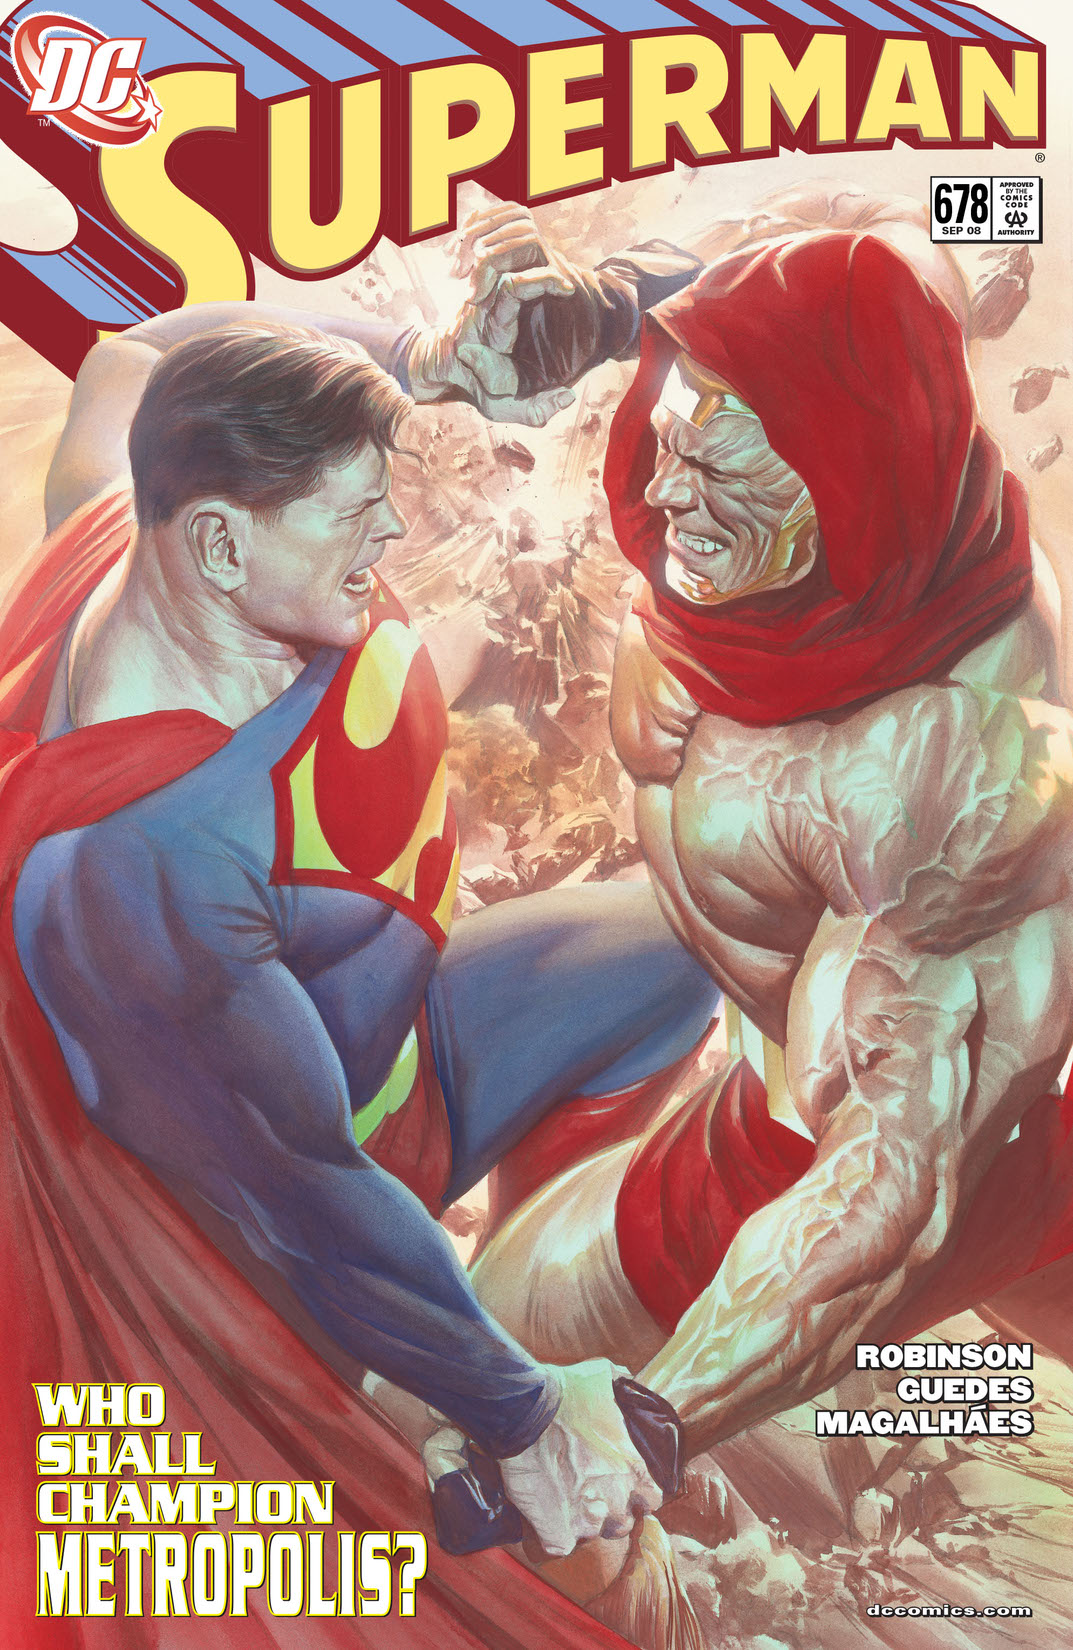 Superman (2006-) #678 preview images